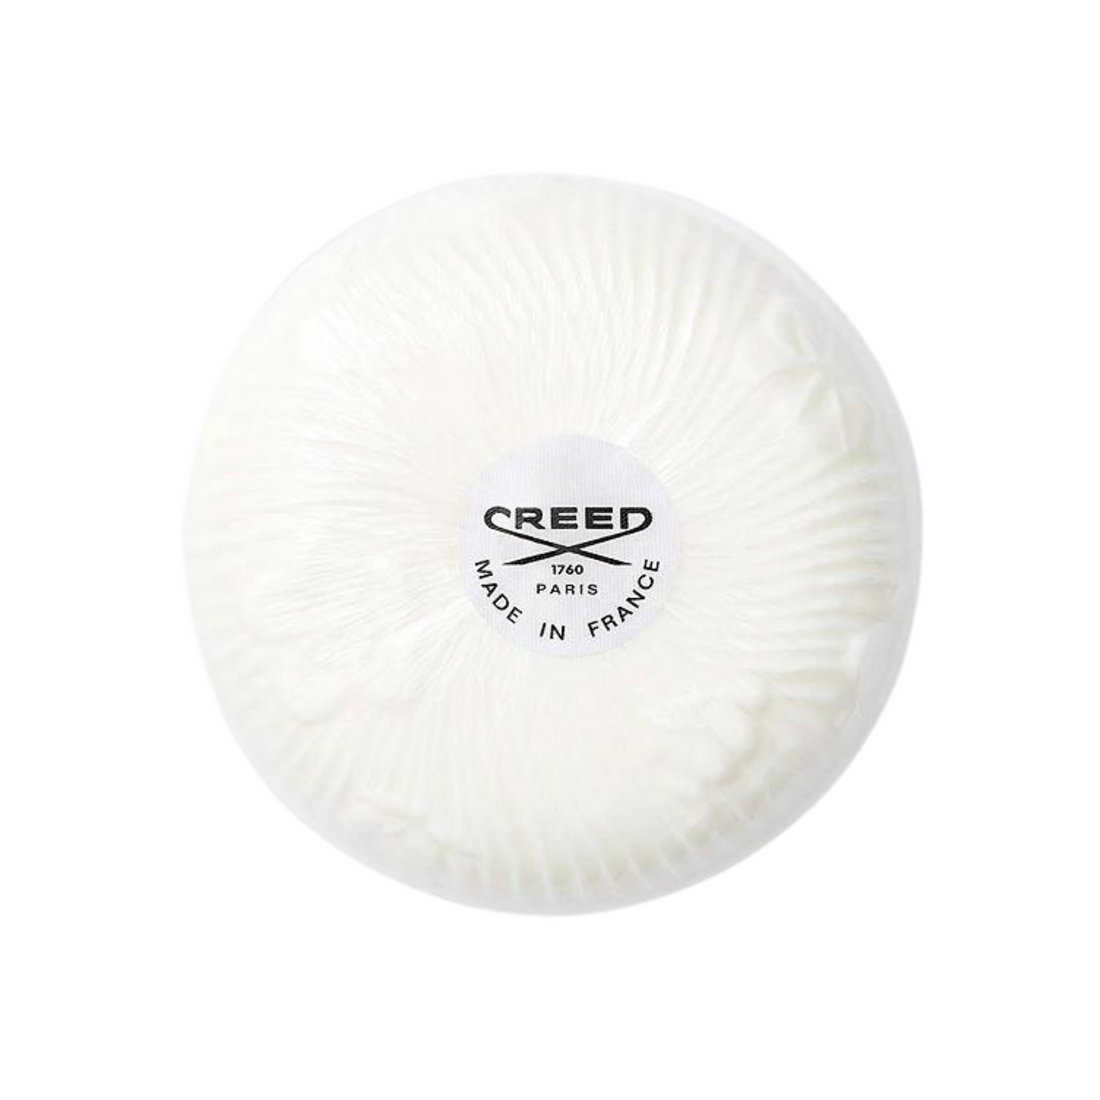 CREED AVENTUS FOR HER SOAP